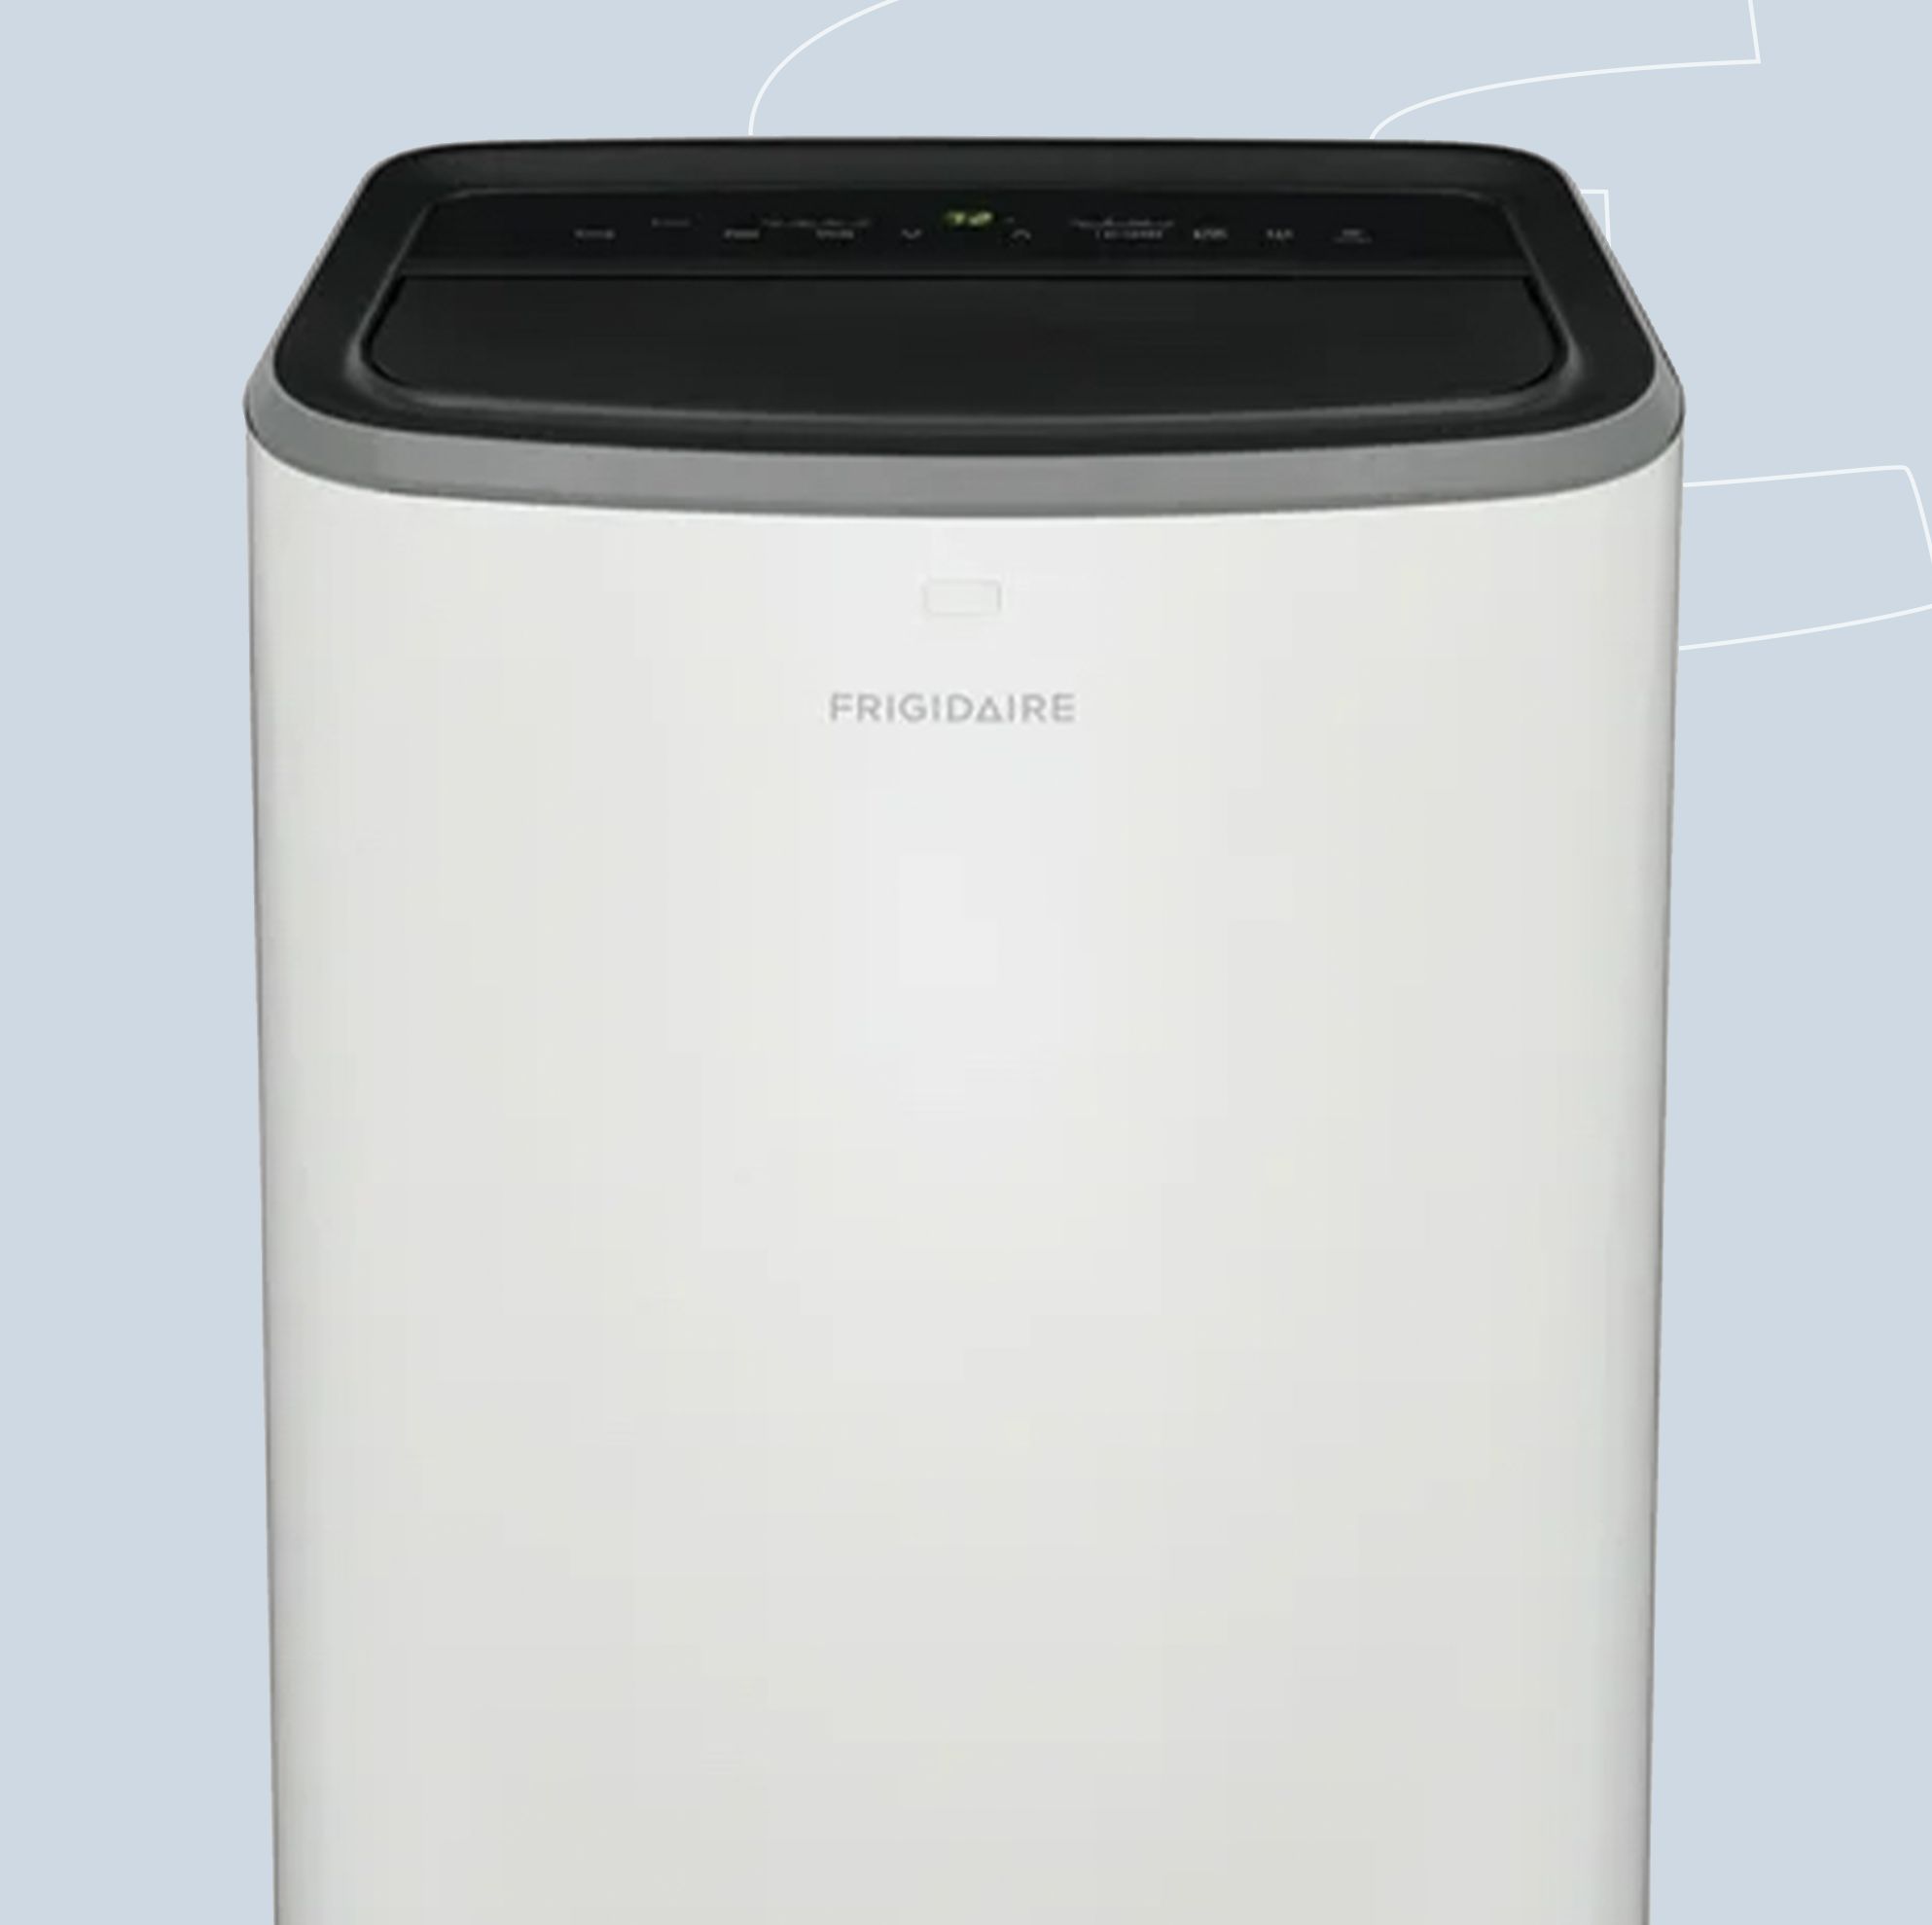 These 6 Portable Air Conditioners Are No Match for the Summer Heat